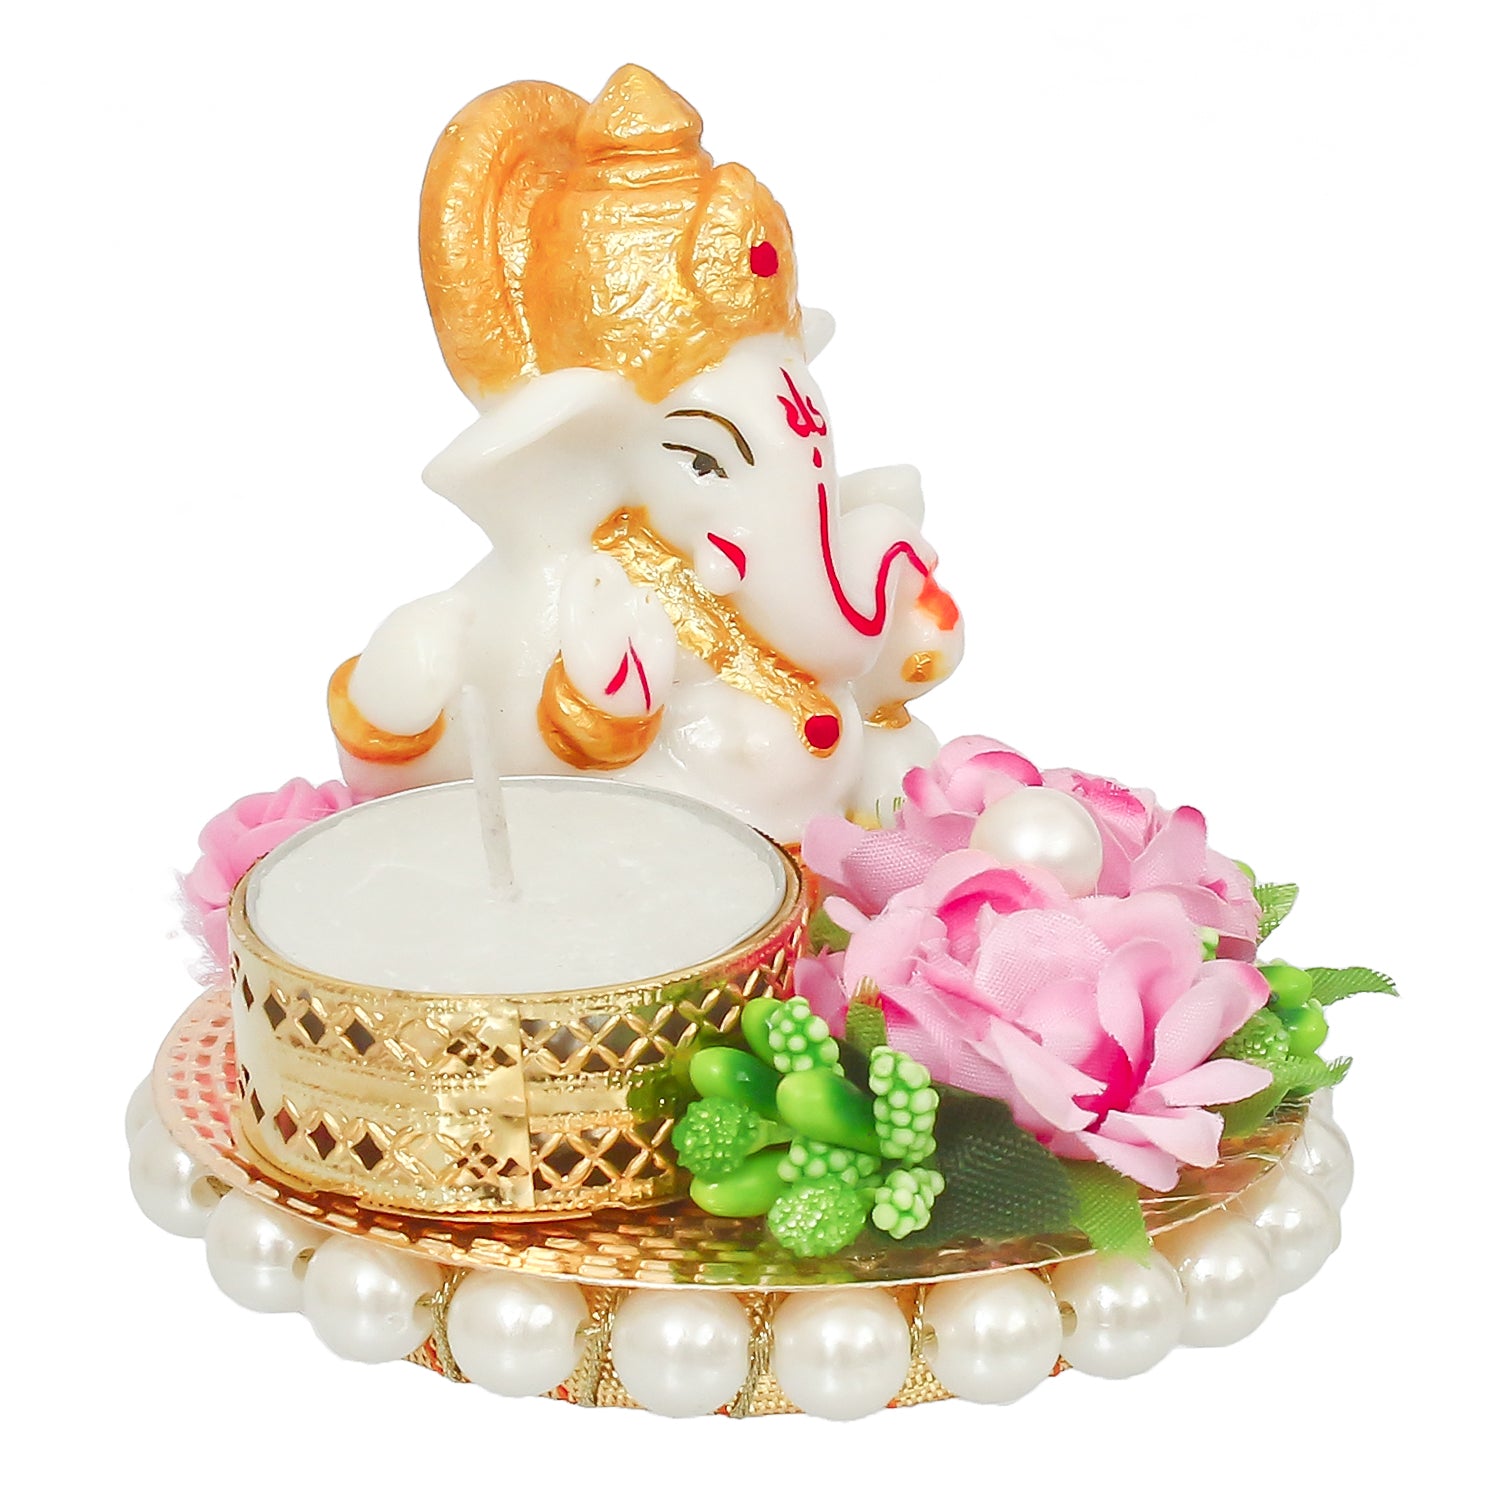 Polyresin Lord Ganesha Idol on Decorative Metal Plate with Tea Light Holder (Pink, Green and White) 5